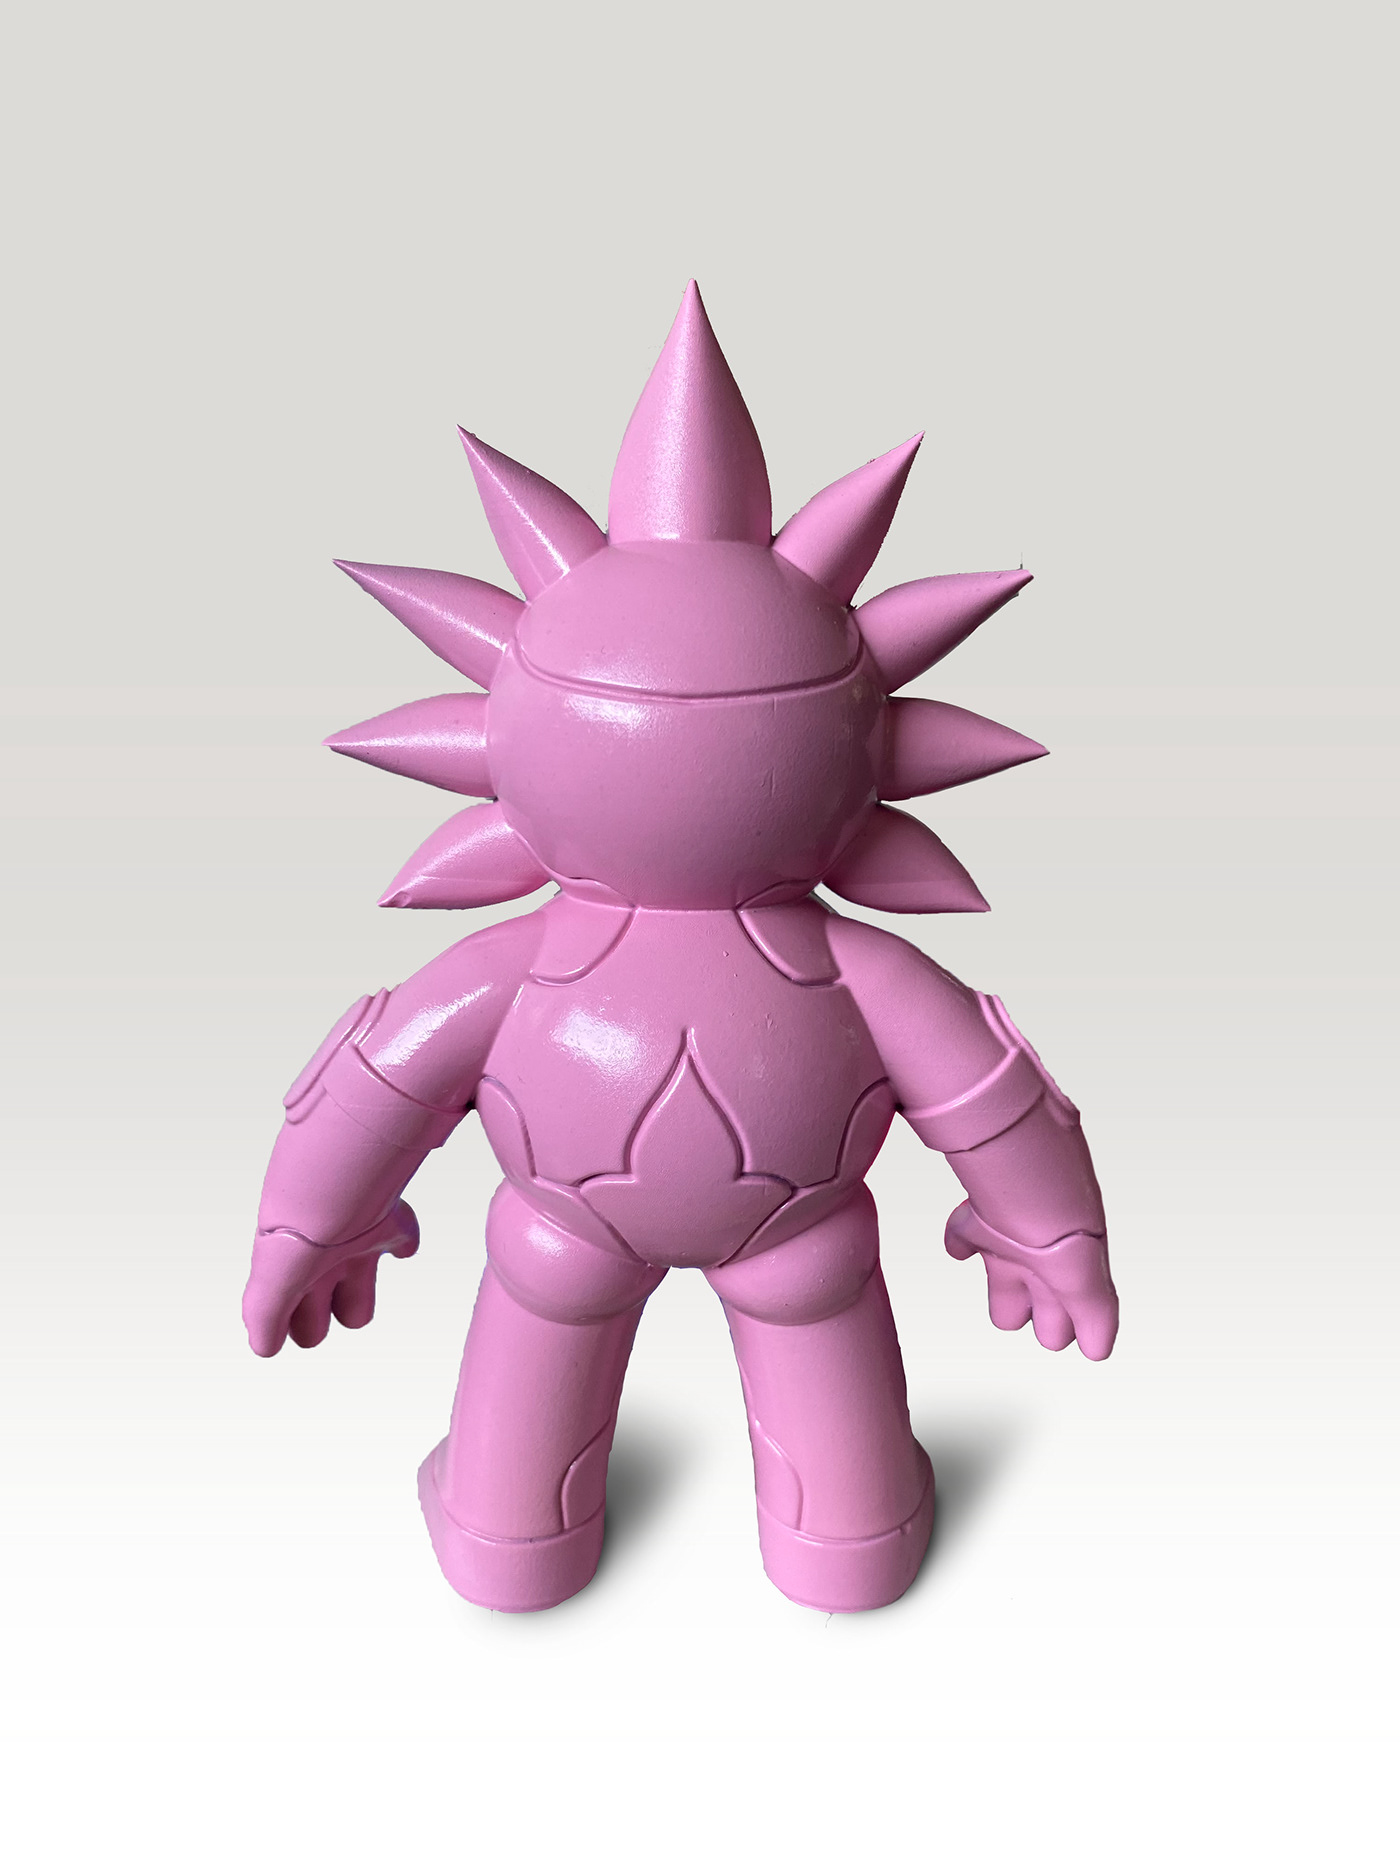 3D Character Character design  product Render sculpture toy toy design 